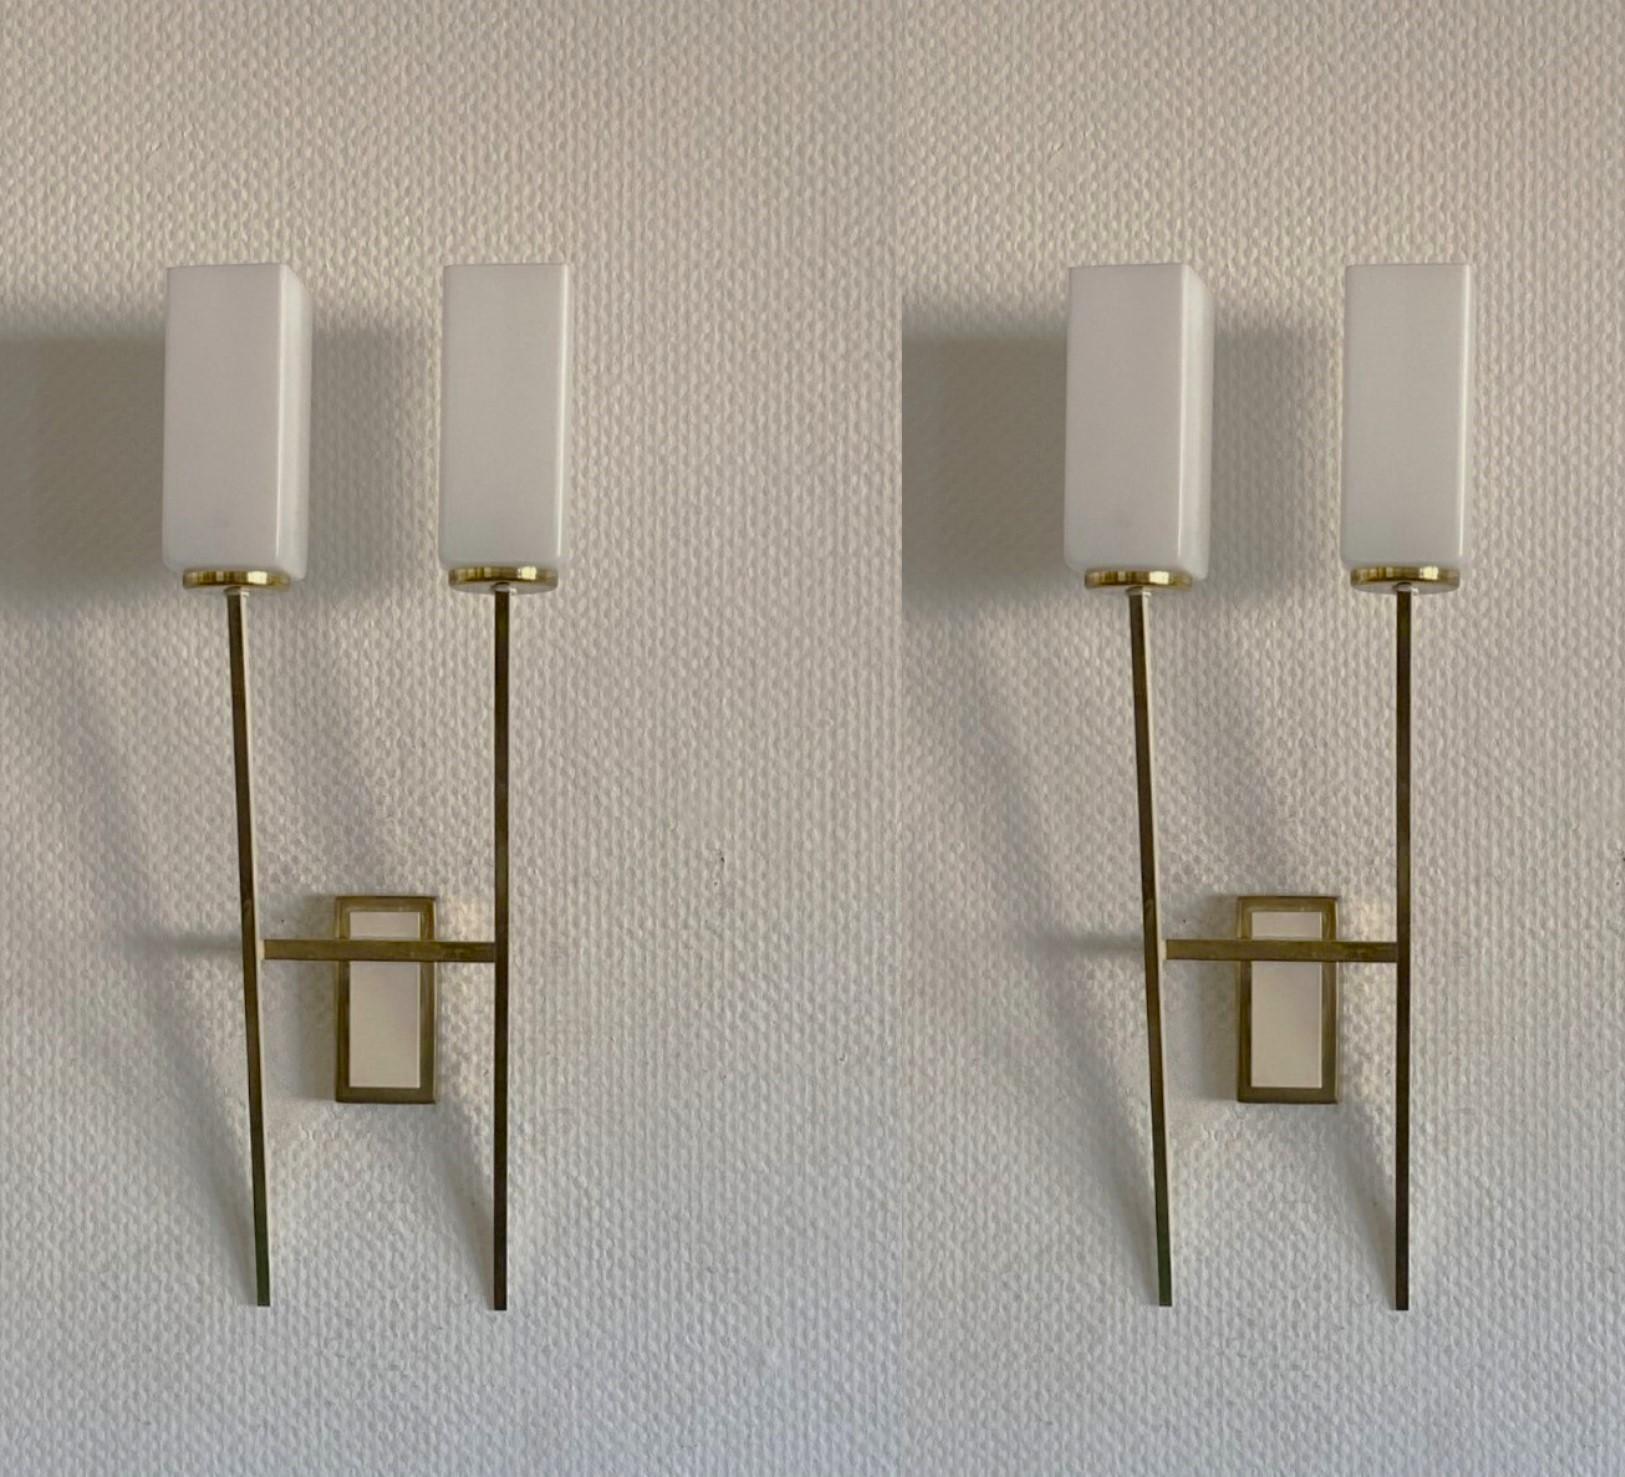 A Pair of tall Stilnovo two-light  wall sconces, Italy, 1960, modernist and clear lines design, brass galery with opaline glass shades - the brass mounts are parcel white enameled. Both sconces in fine vintage condition. Each sconce takes two E14